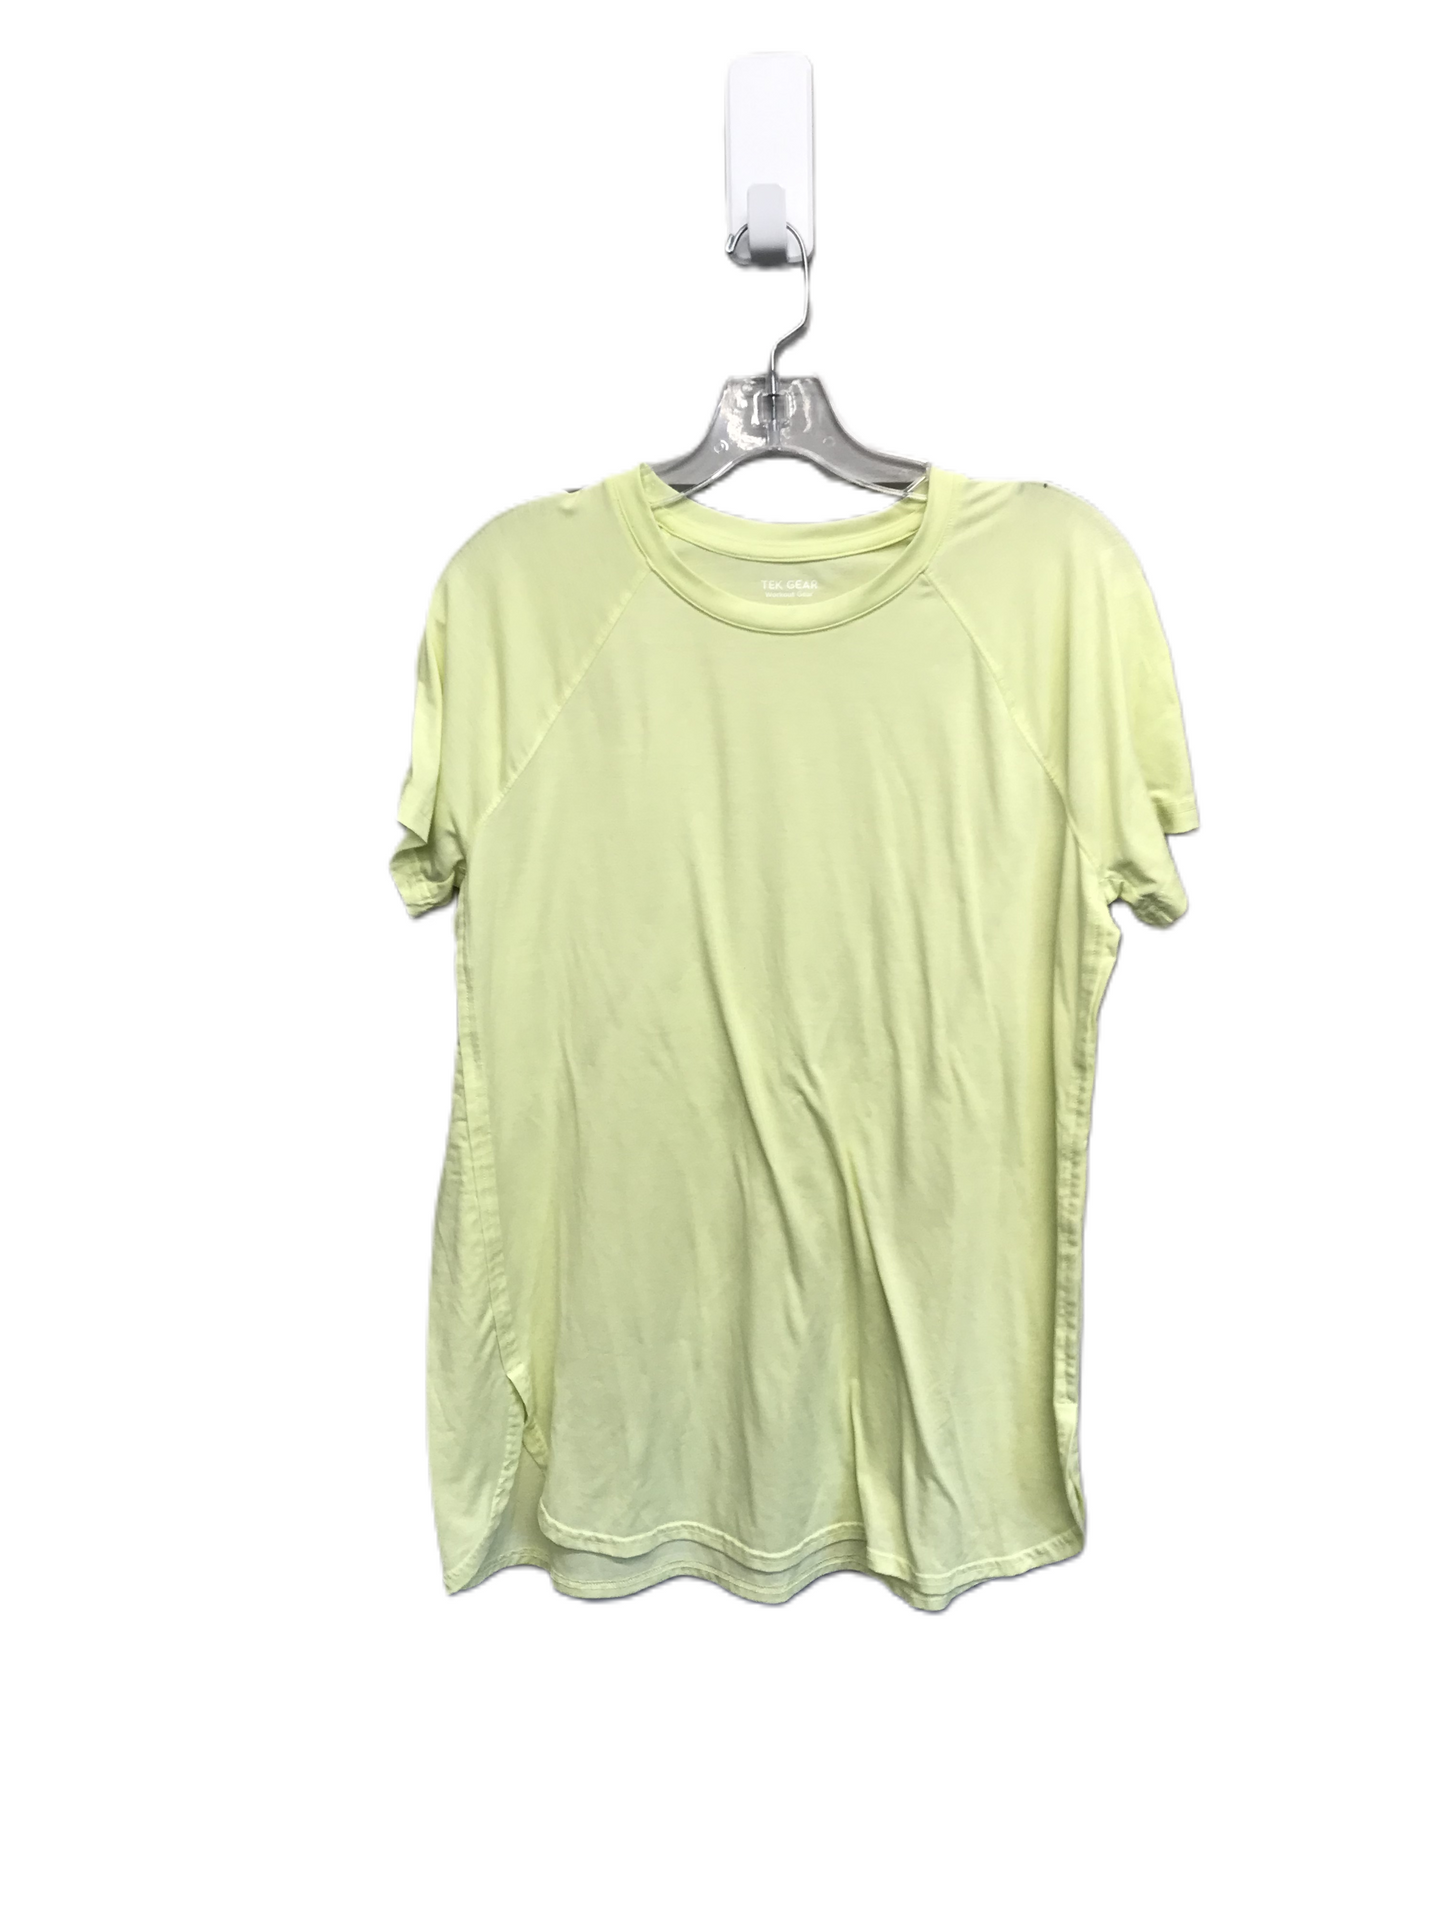 Chartreuse Athletic Top Short Sleeve By Tek Gear, Size: L